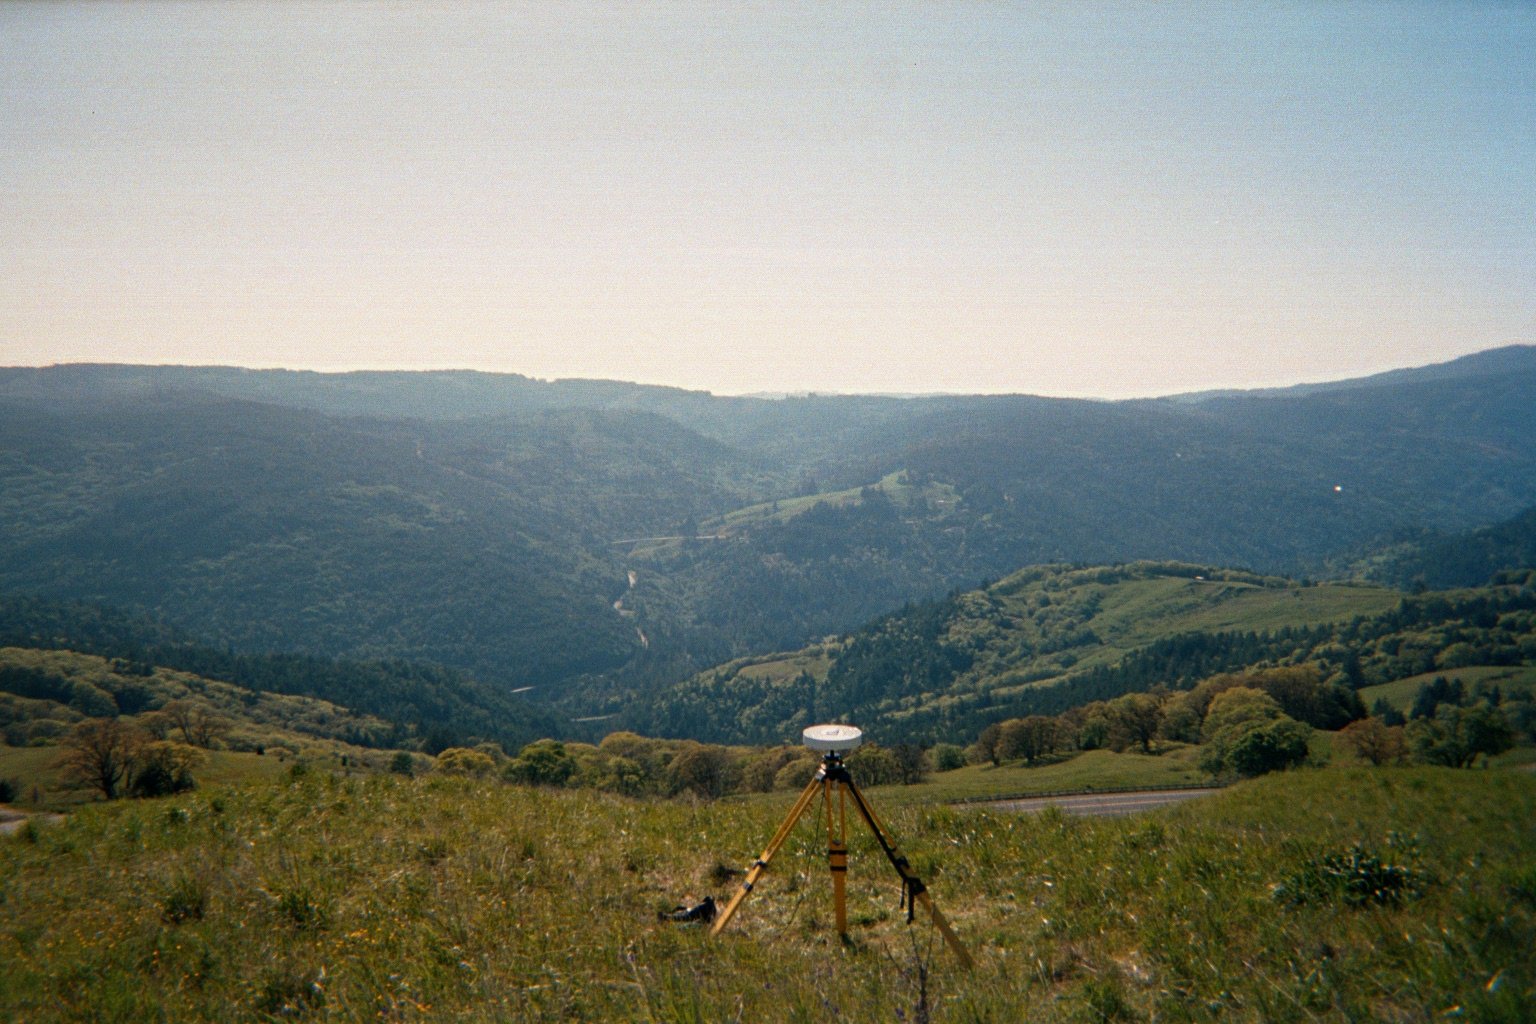 A surveyor's tripod erected on a hillside above Highway 299 in Humboldt county.